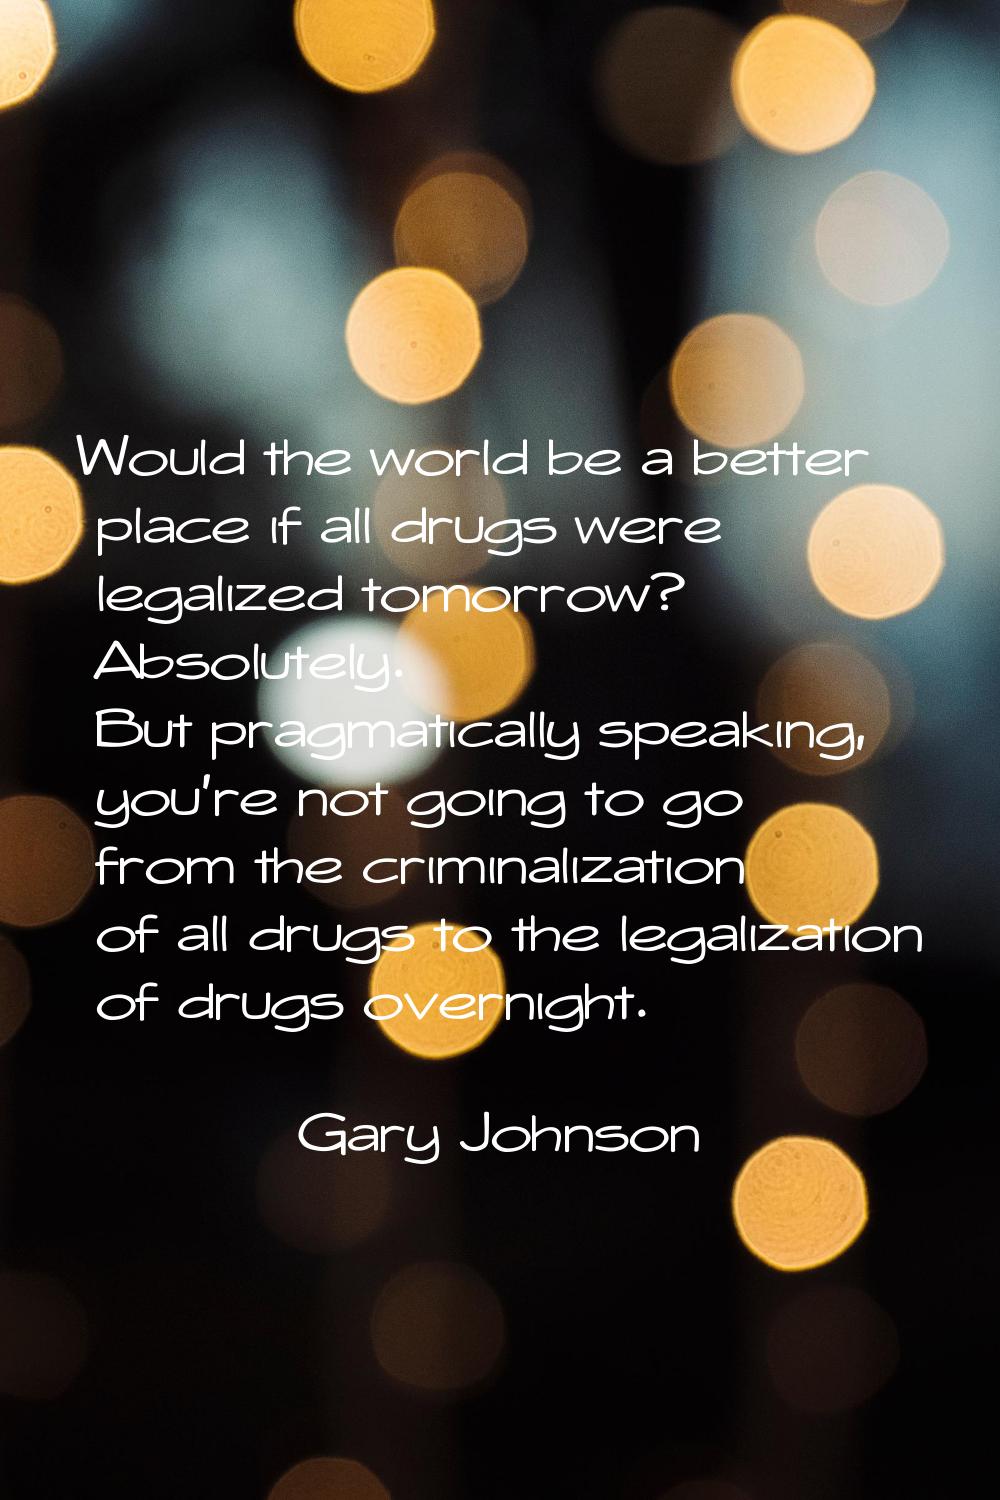 Would the world be a better place if all drugs were legalized tomorrow? Absolutely. But pragmatical